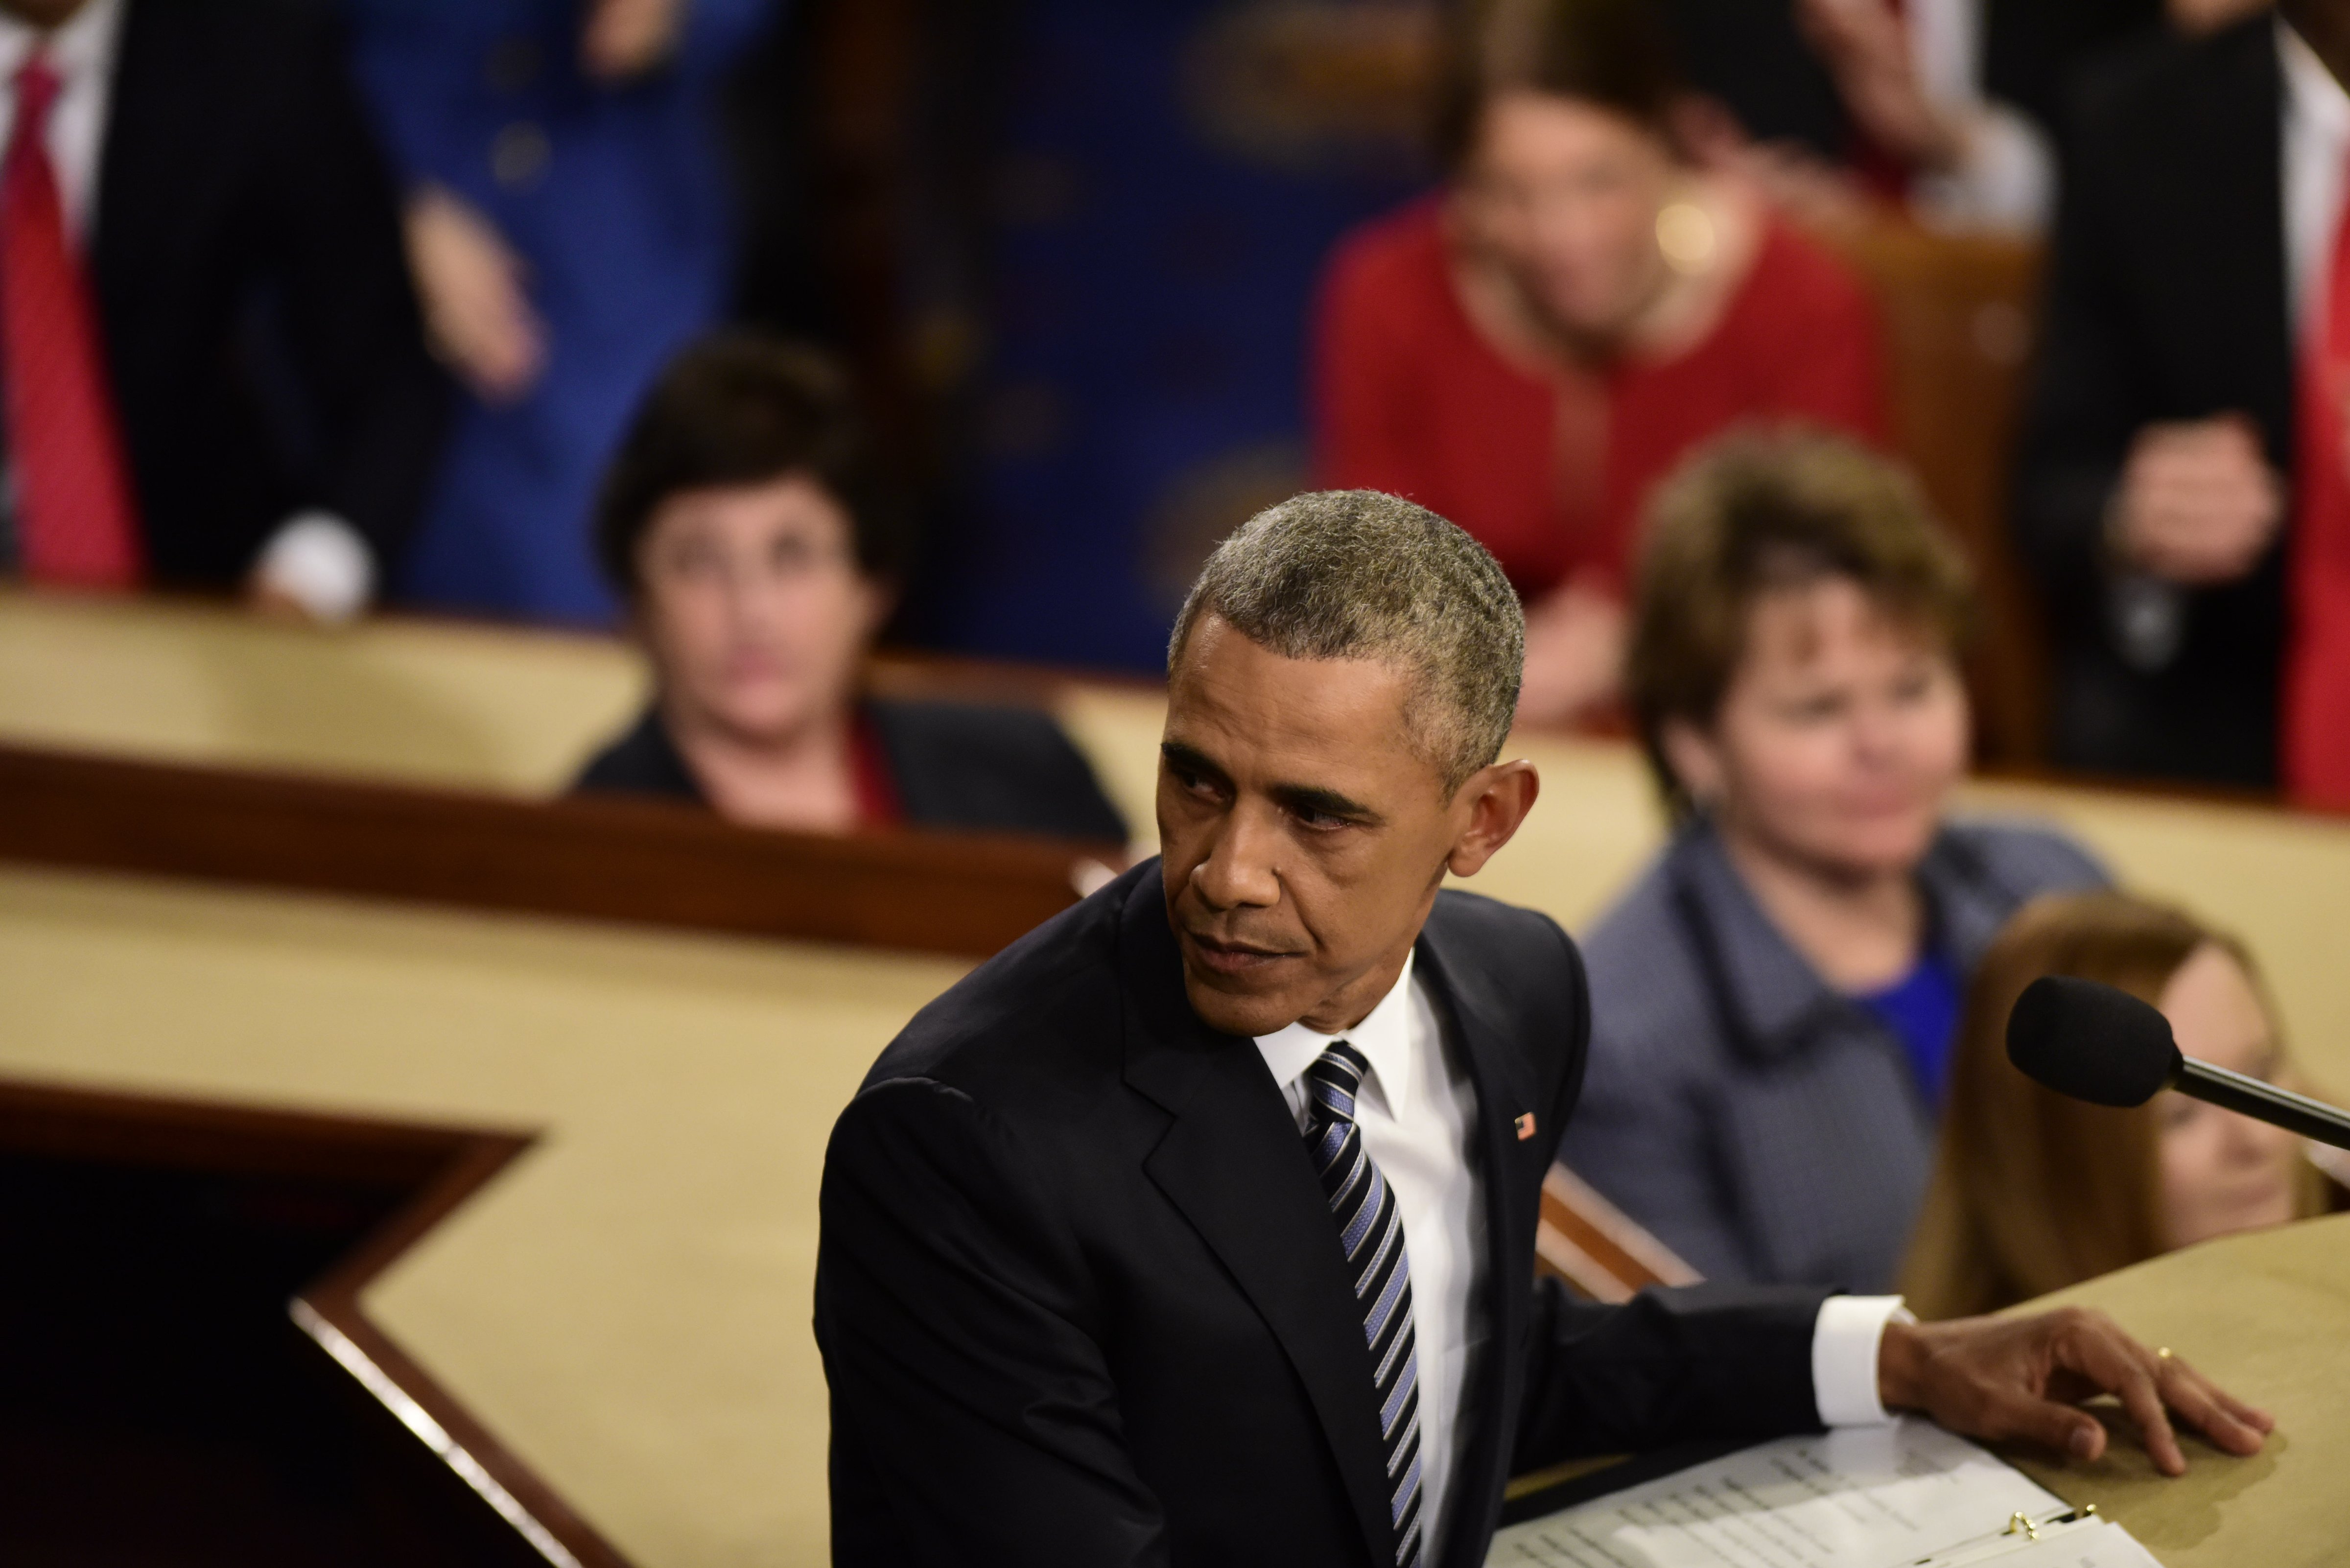 President Obama delivers his State of the Union address on Jan. 12, 2016 at the US Capitol in Washington, DC. (Melina Mara—The Washington Post/Getty Images)